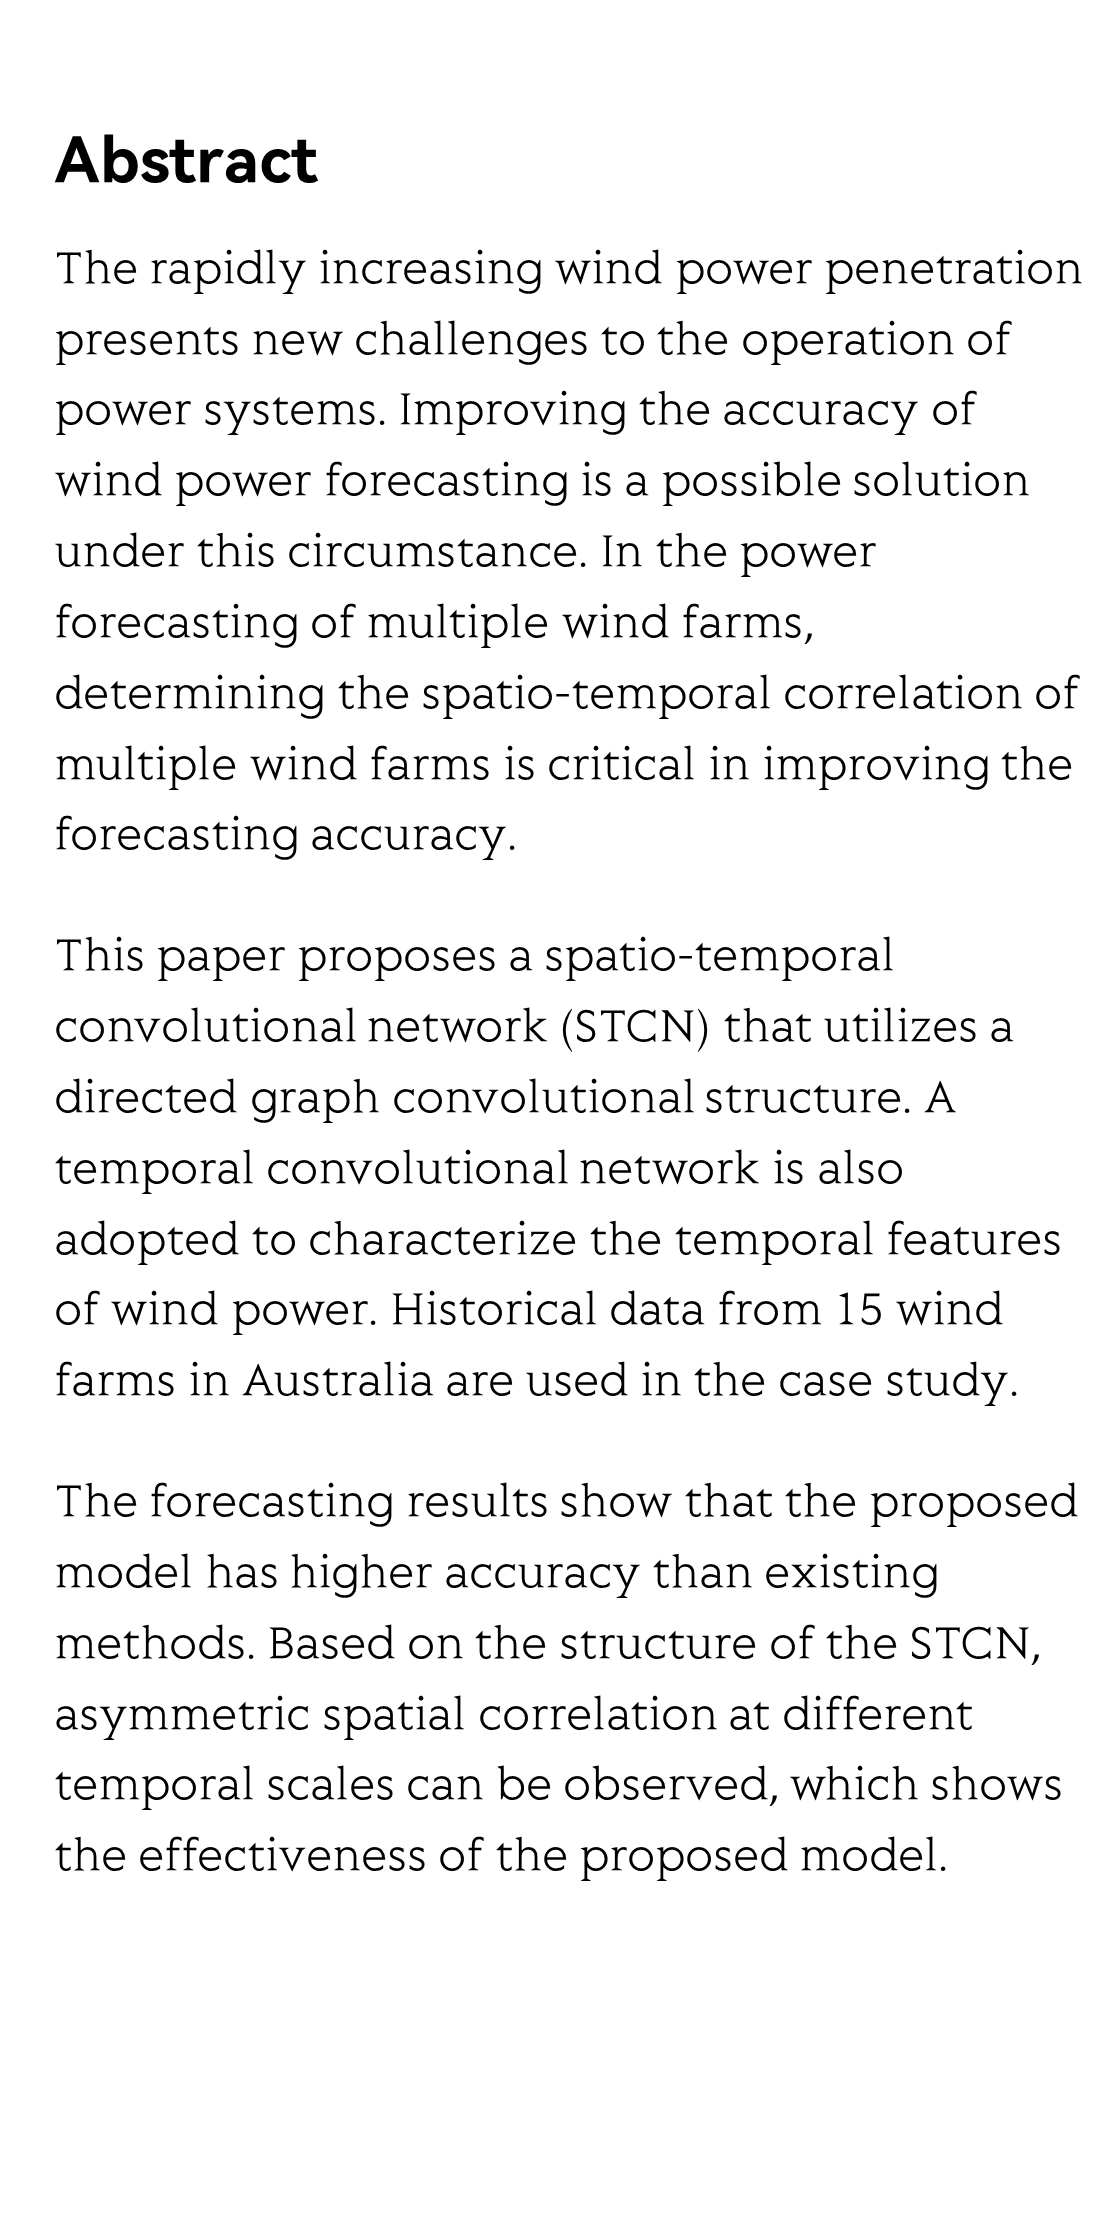 Spatio-Temporal Convolutional Network Based Power Forecasting of Multiple Wind Farms_2